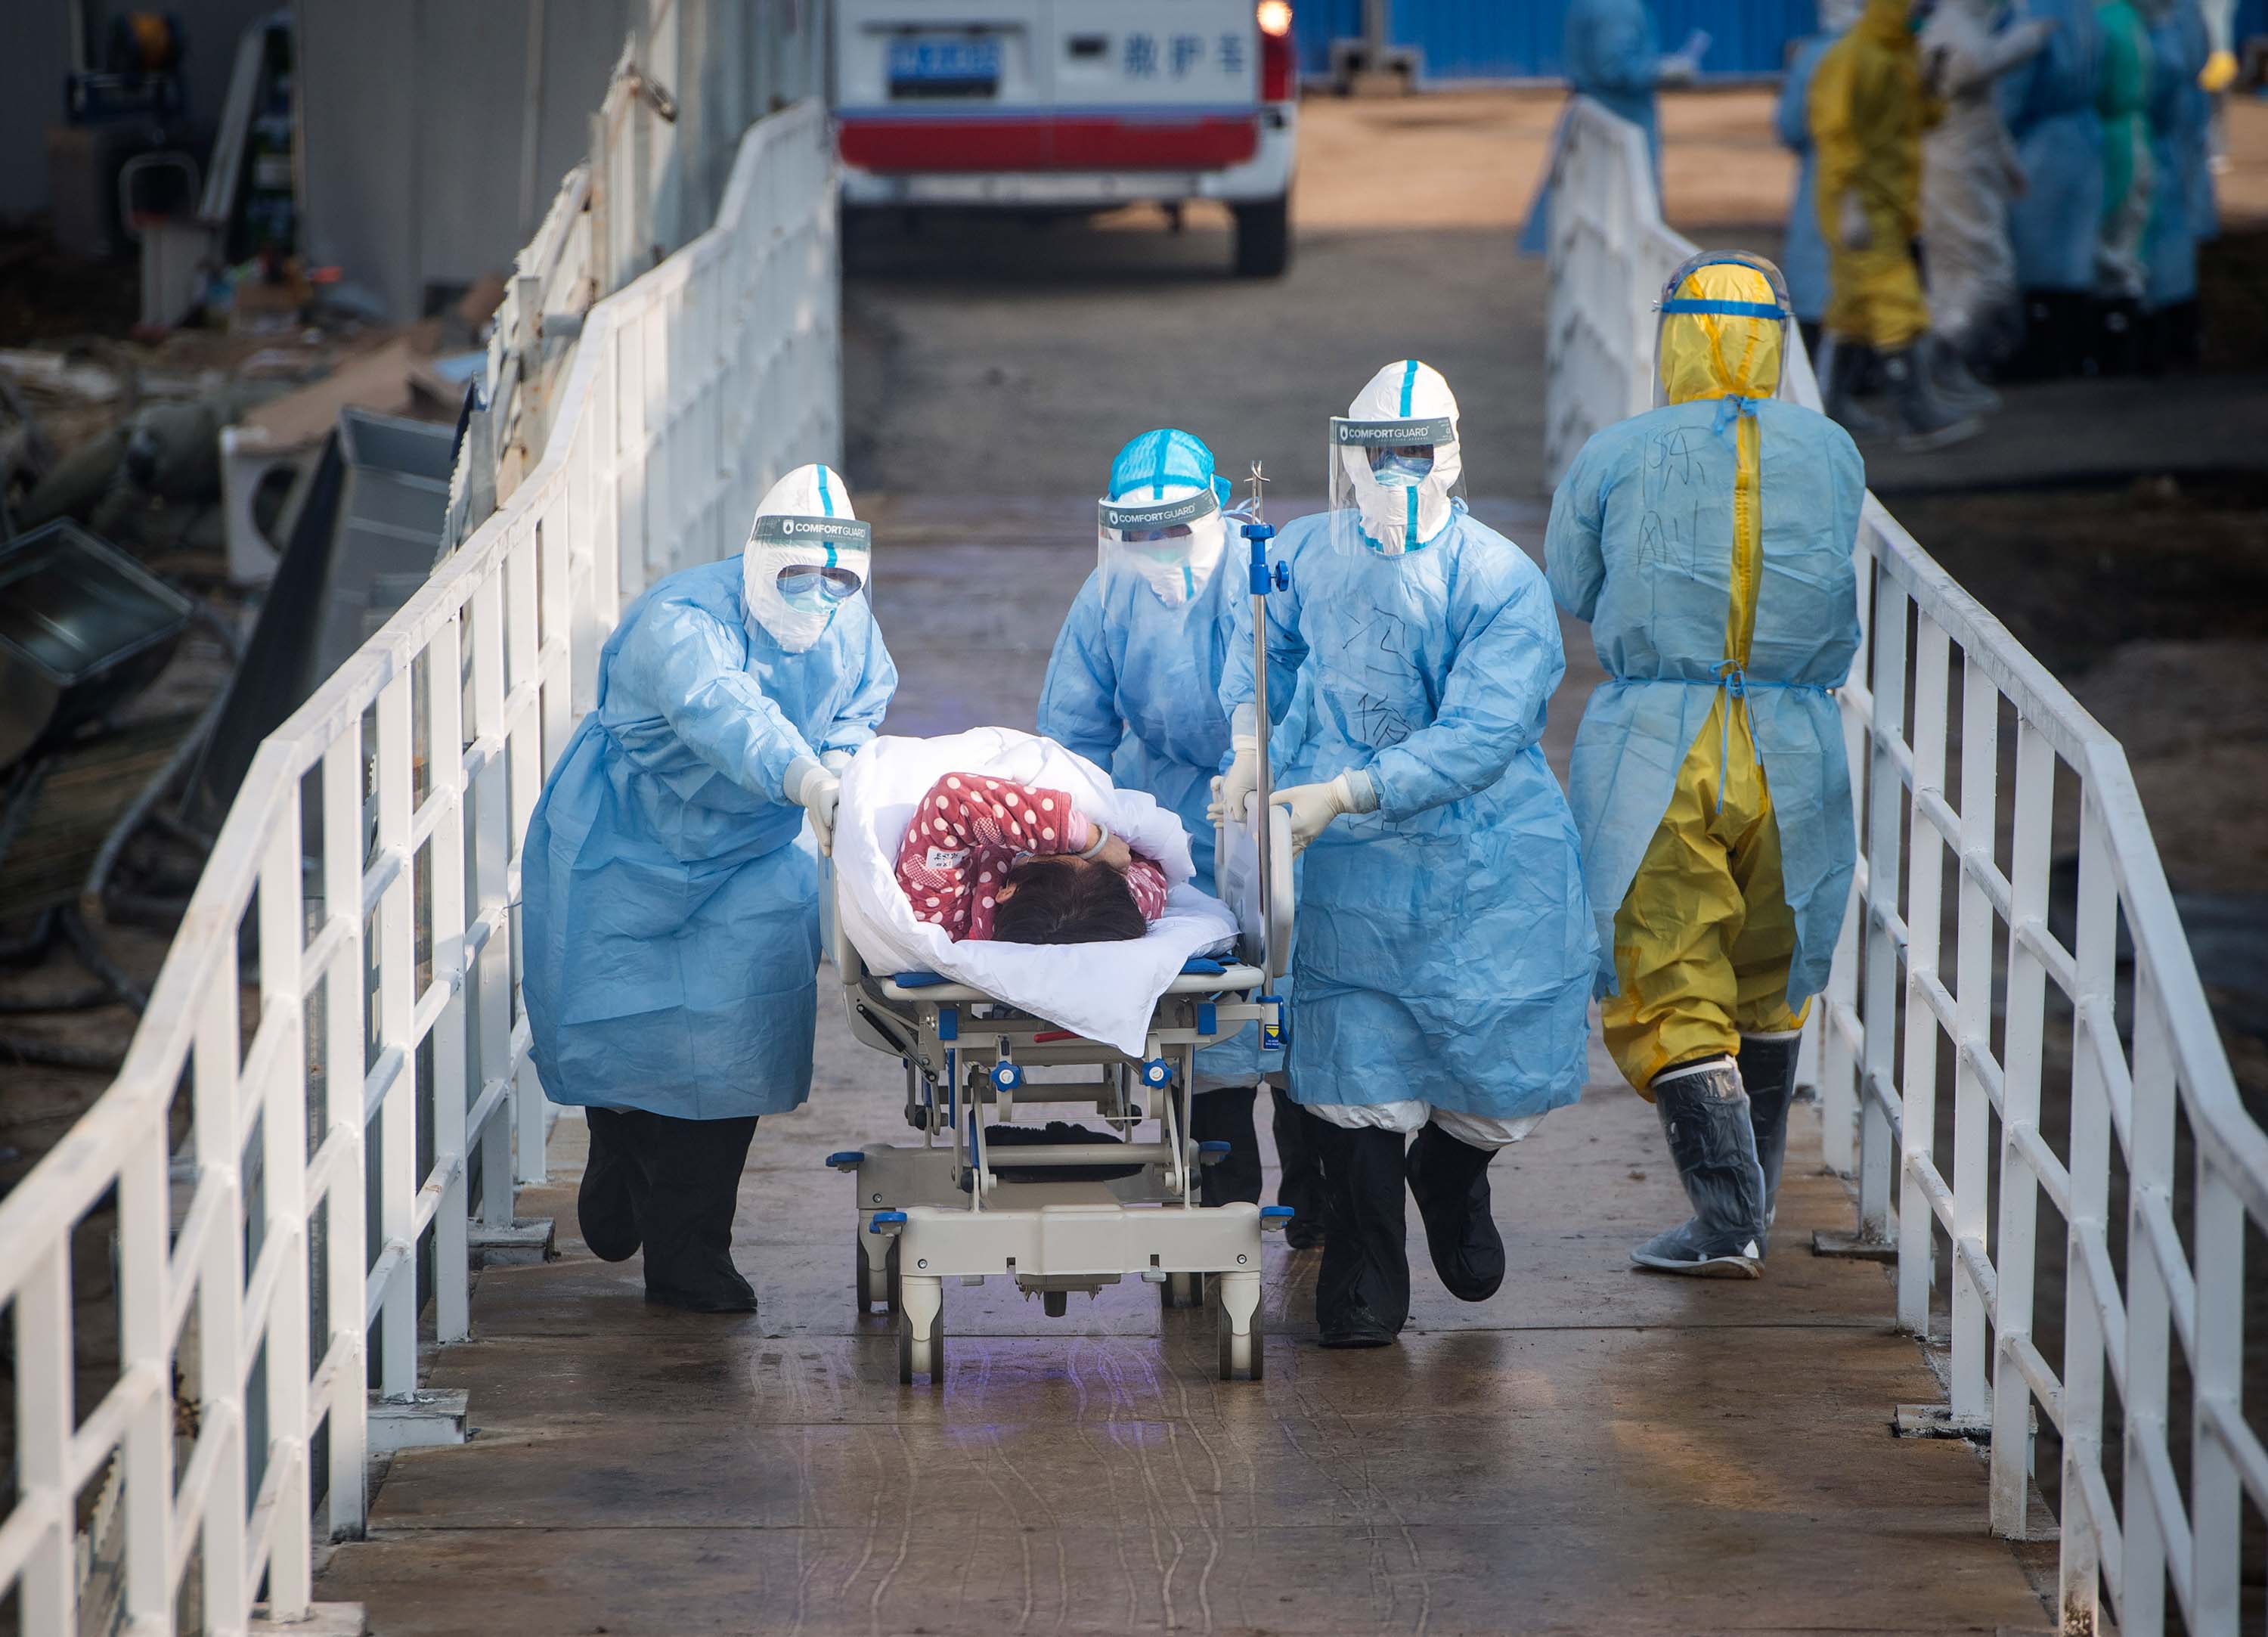 In this photo released by China's Xinhua News Agency on Tuesday, medical workers in protective suits help transfer the first group of patients into the newly-completed Huoshenshan temporary field hospital in Wuhan.